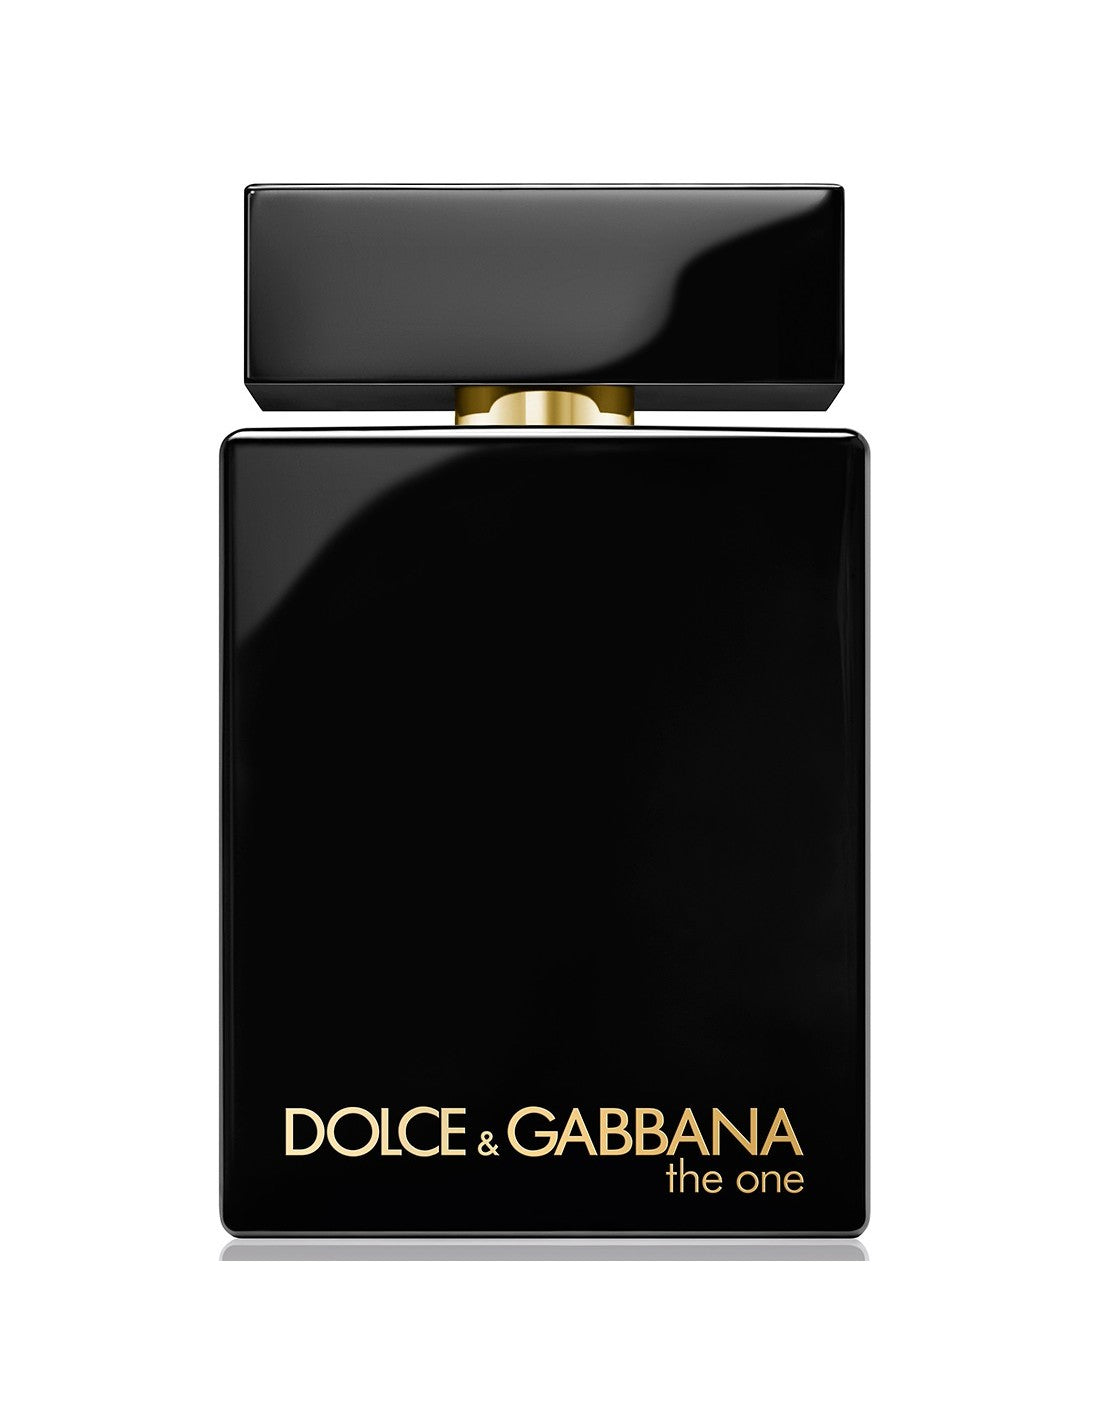 Dolce and Gabbana The One For Men Edp Spray Intenso 100ml